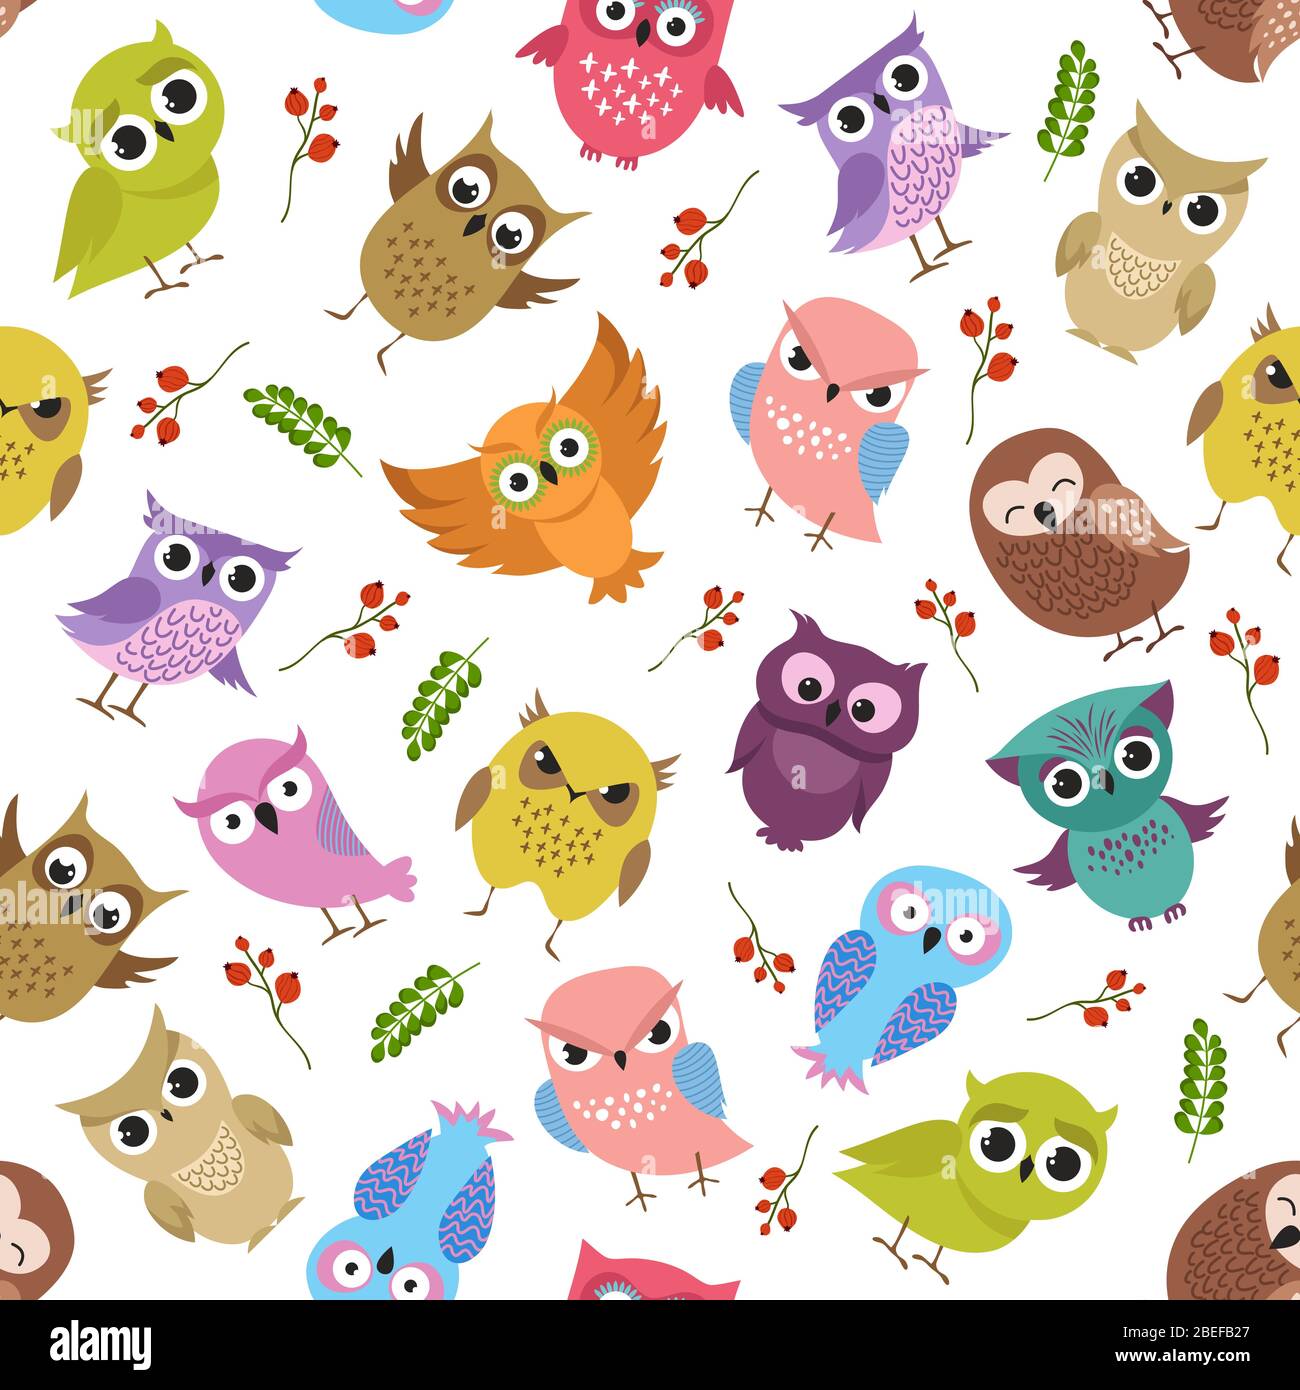 Cute owls vector seamless pattern. Color forest bird animal illustration Stock Vector